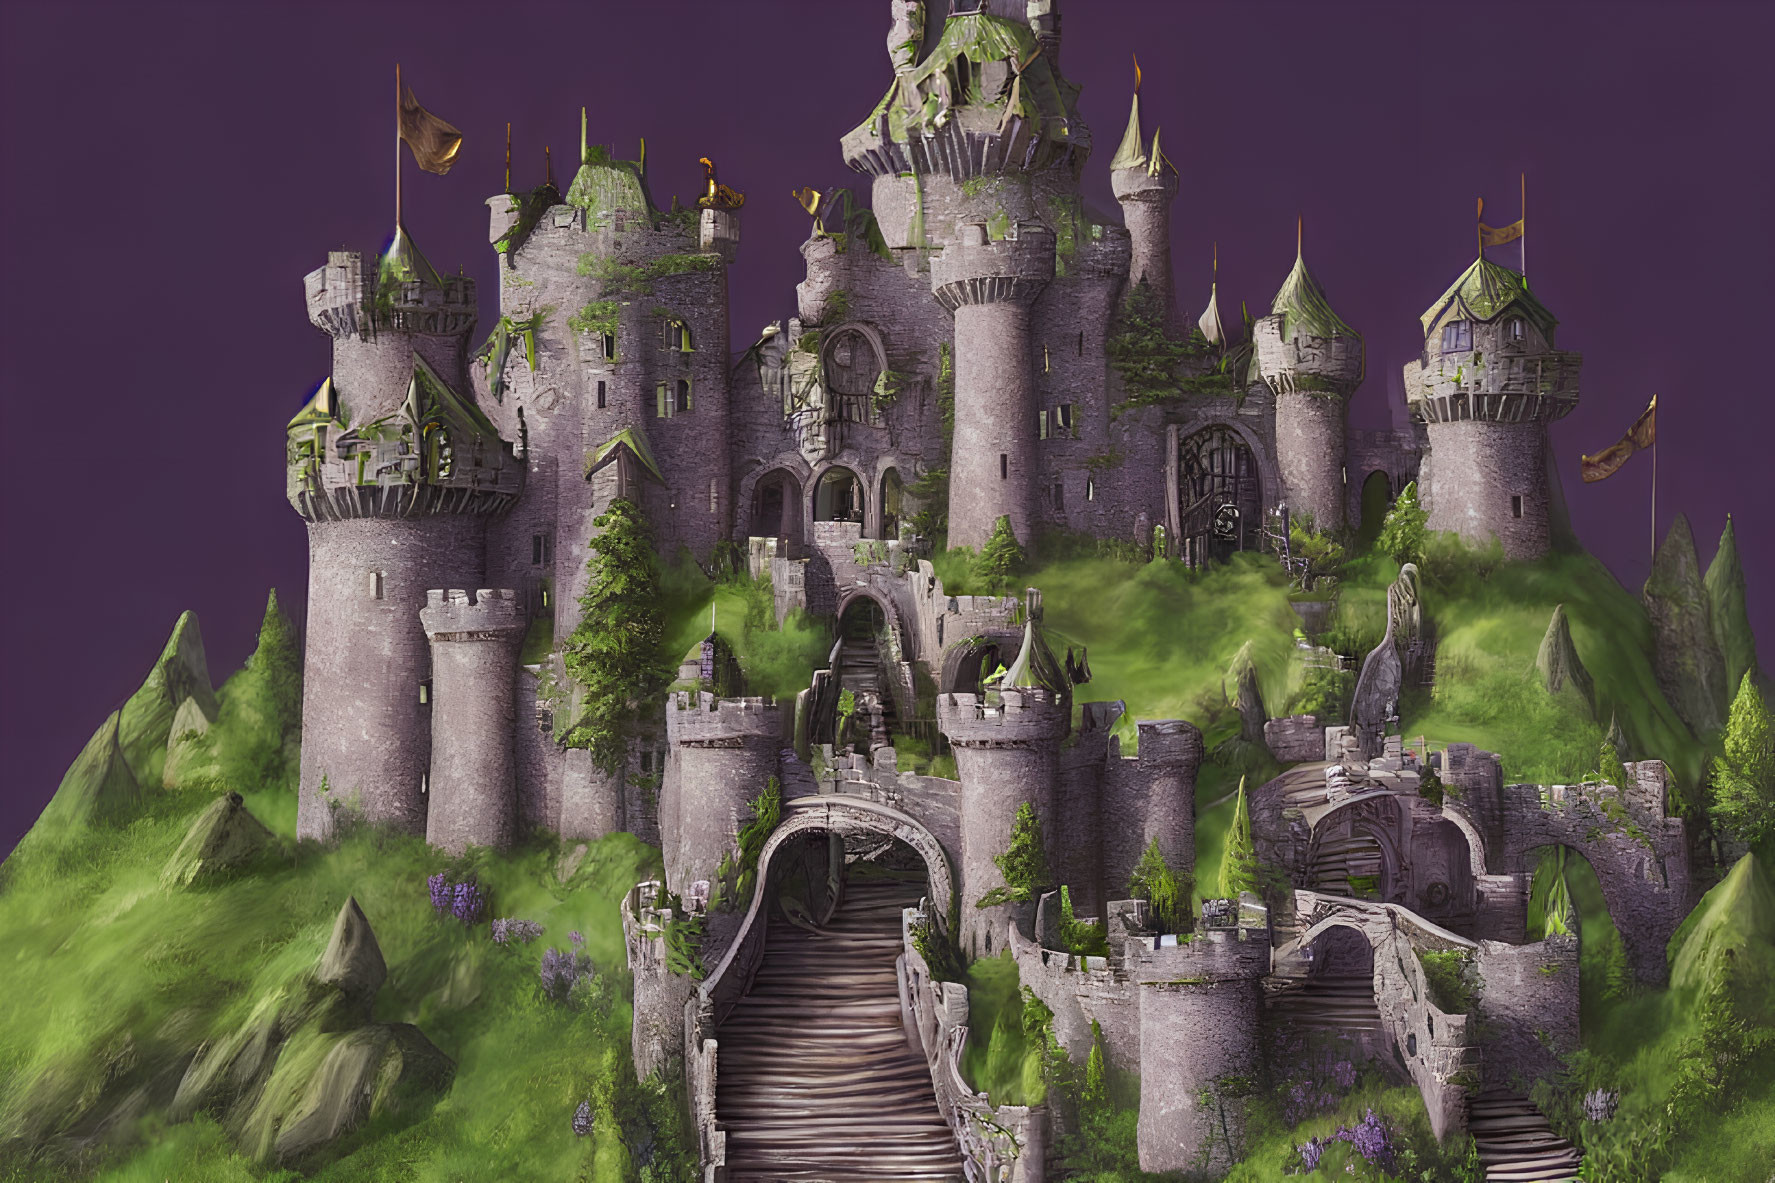 Fantasy castle with spires and towers on lush green hill, purple flora, flying banners, purple